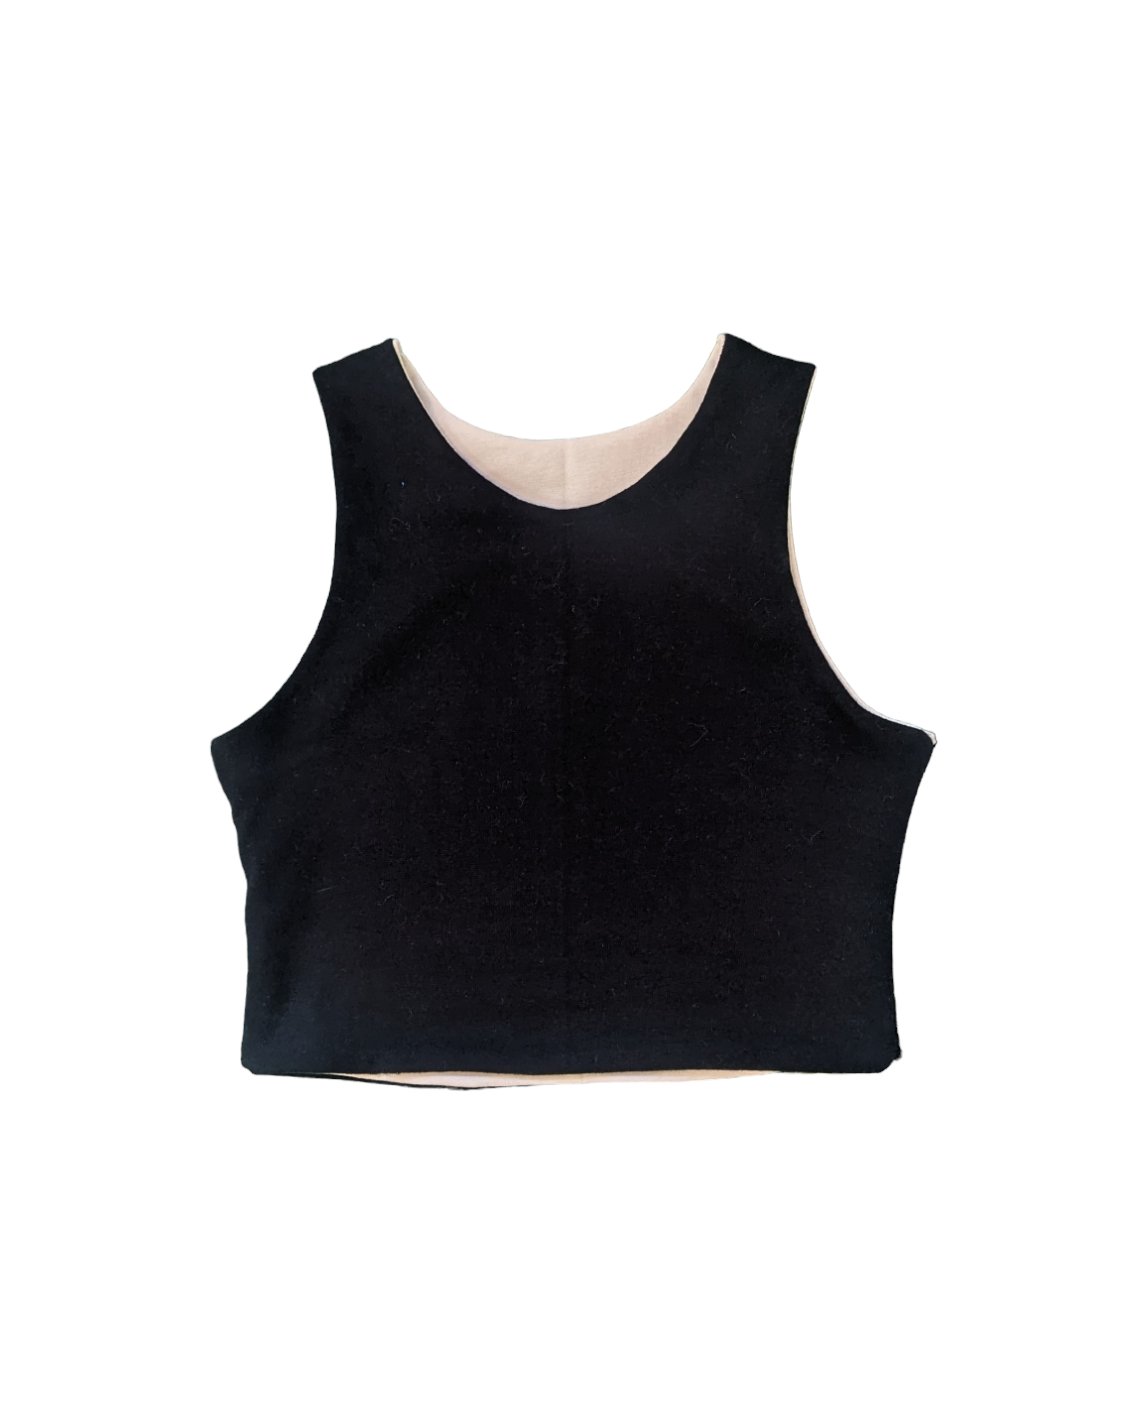 Image of CATCALL: THE REVERSIBLE CROP TOP in CHERRY